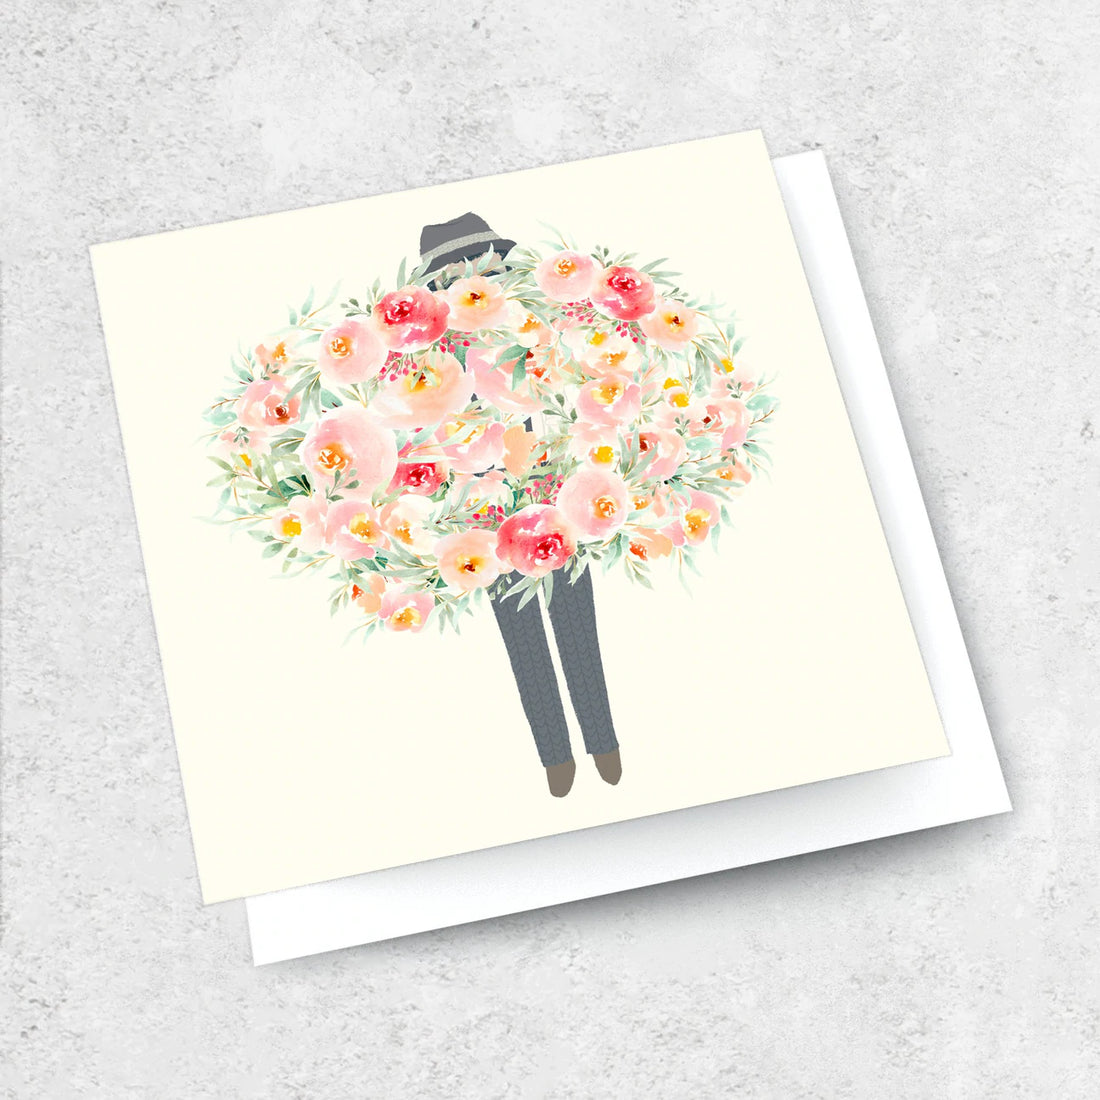 Greeting card, illustration of man holding a big bunch of flowers